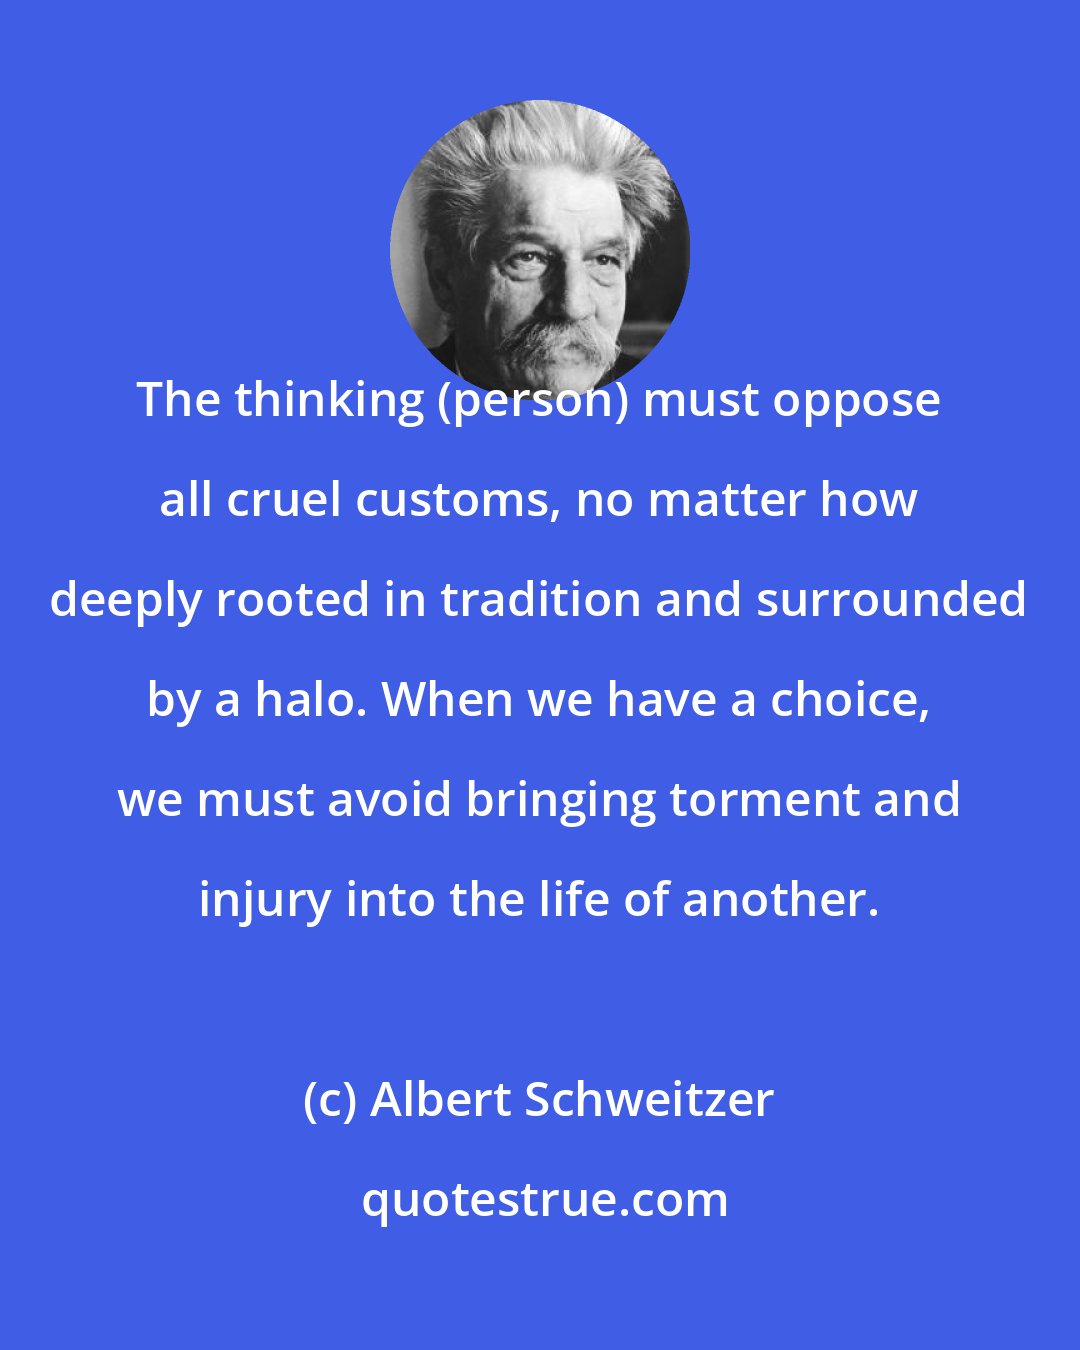 Albert Schweitzer: The thinking (person) must oppose all cruel customs, no matter how deeply rooted in tradition and surrounded by a halo. When we have a choice, we must avoid bringing torment and injury into the life of another.